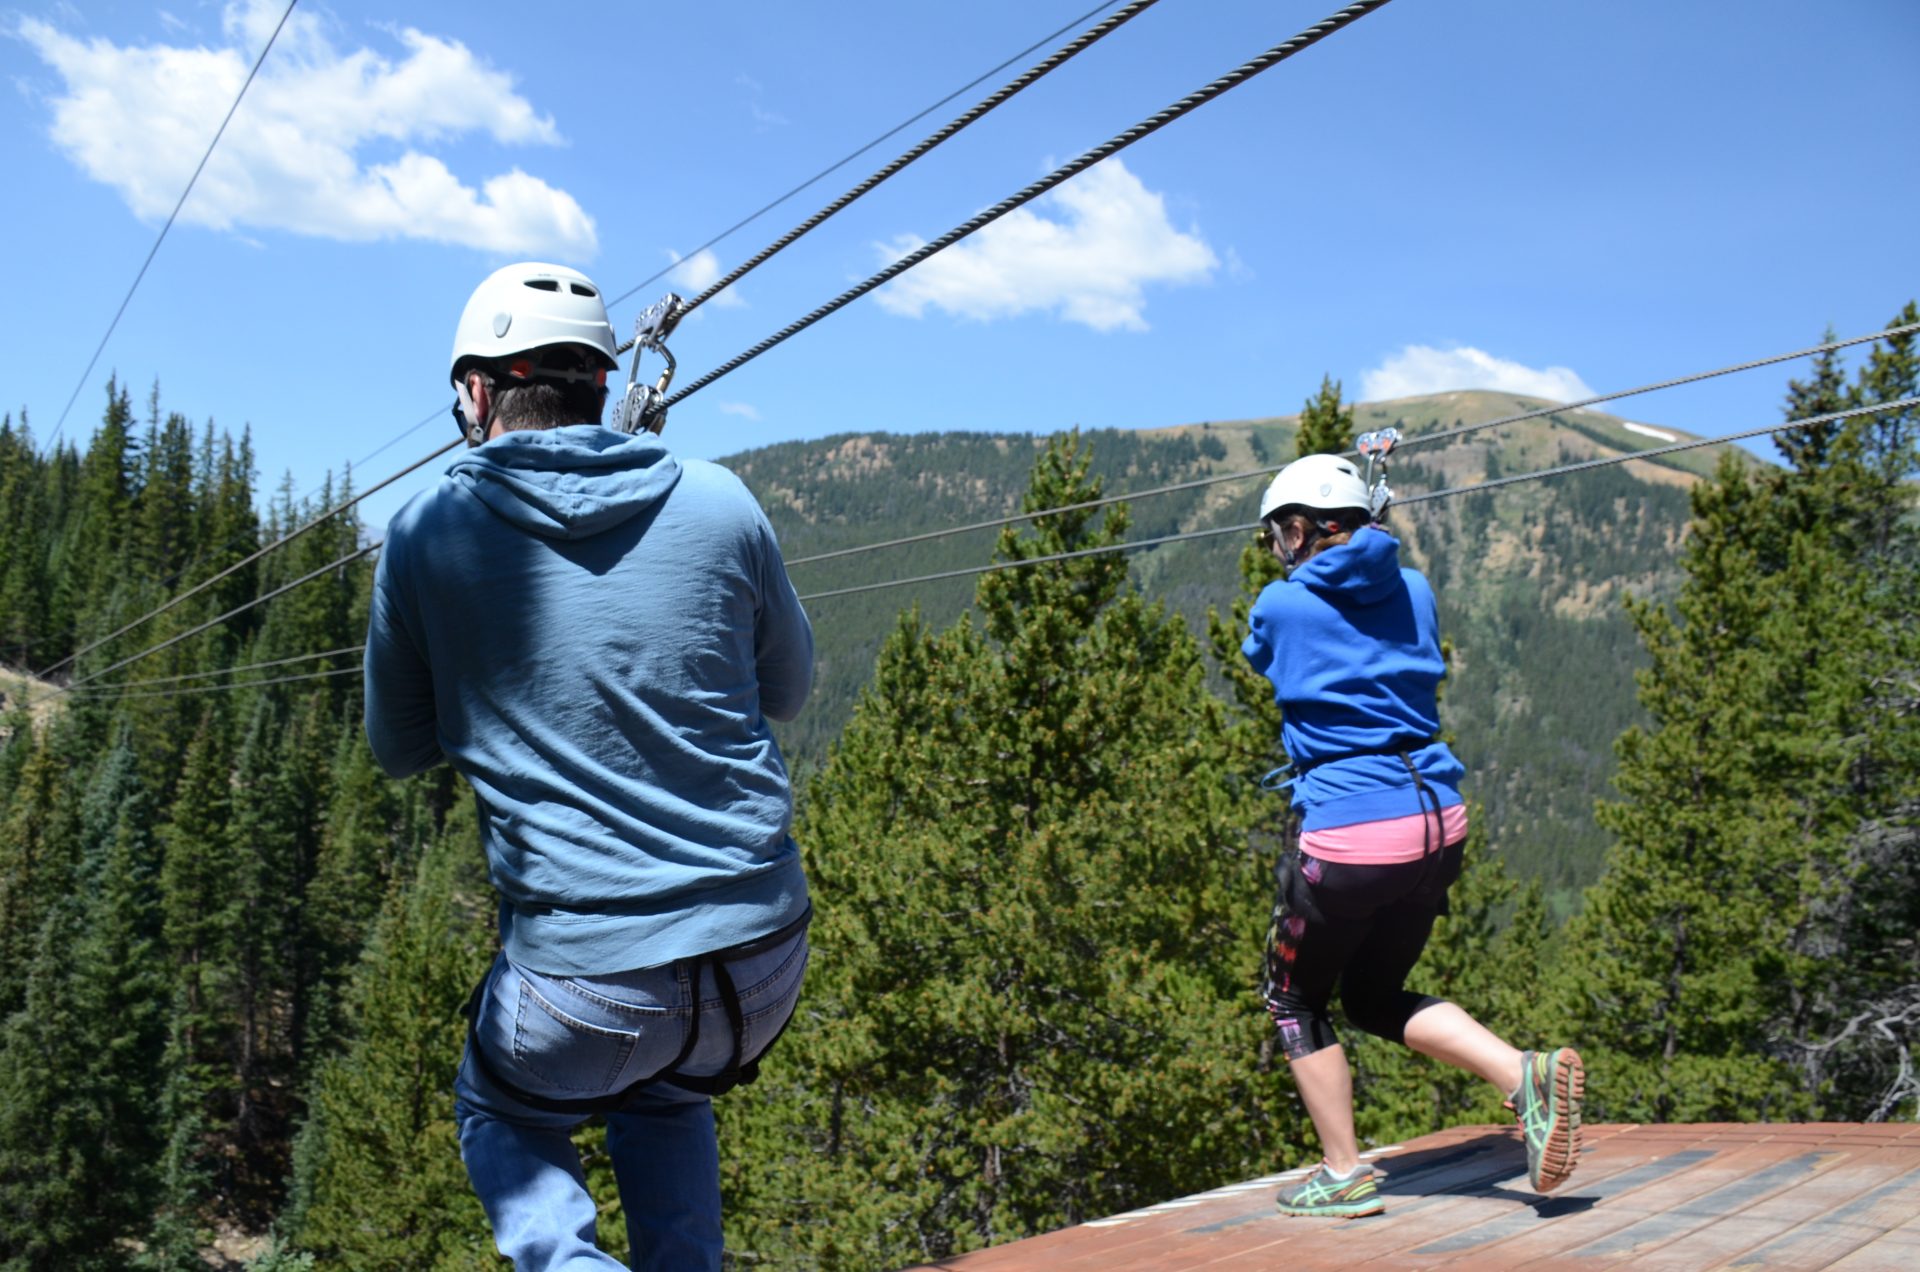 We operate the best zipline in Colorado, where fun is surpassed only by safety measures